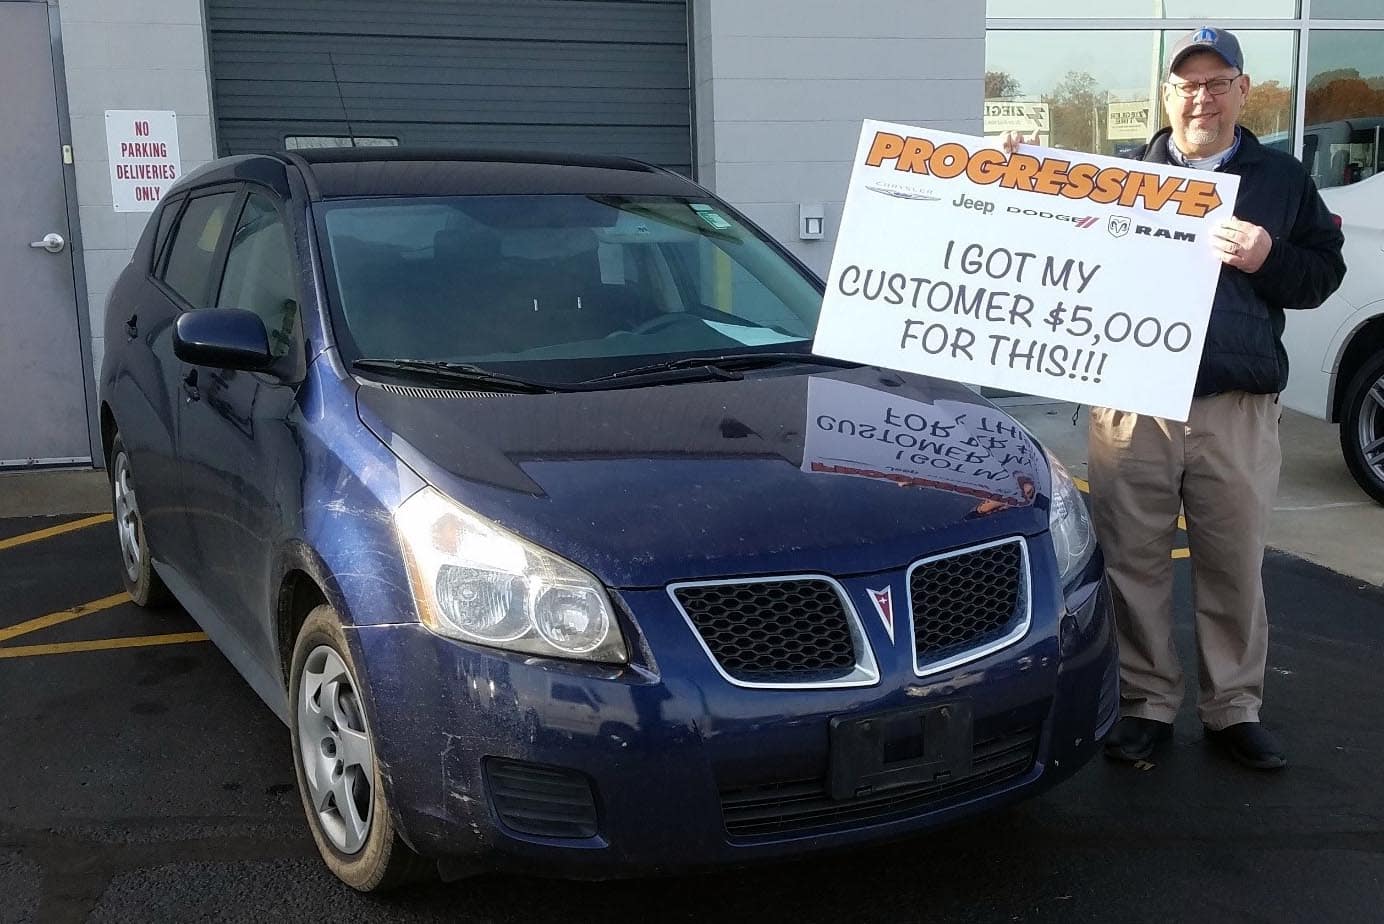 smiling Progressive customer next to the trade-in Pontiac sedan they received $5000 for